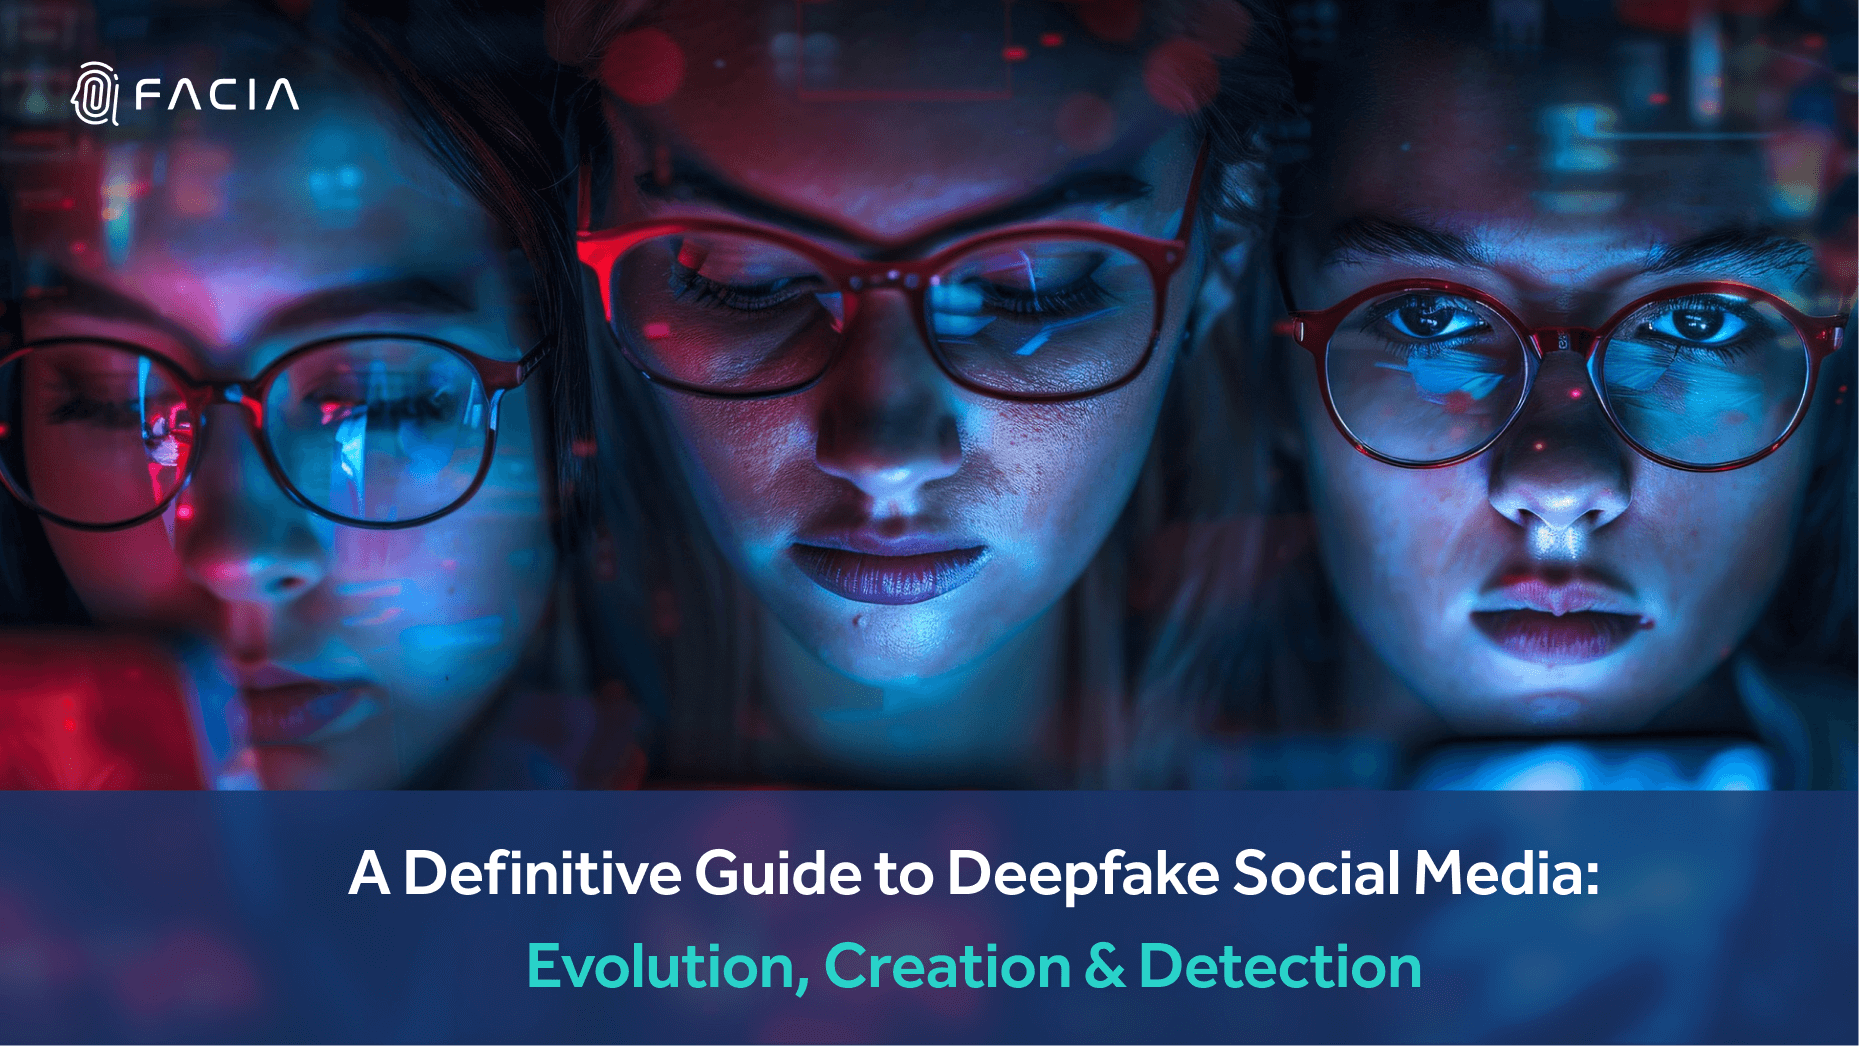 This featured image shows the proliferation of deepfake social media including the evolution, creation, and detection measures.